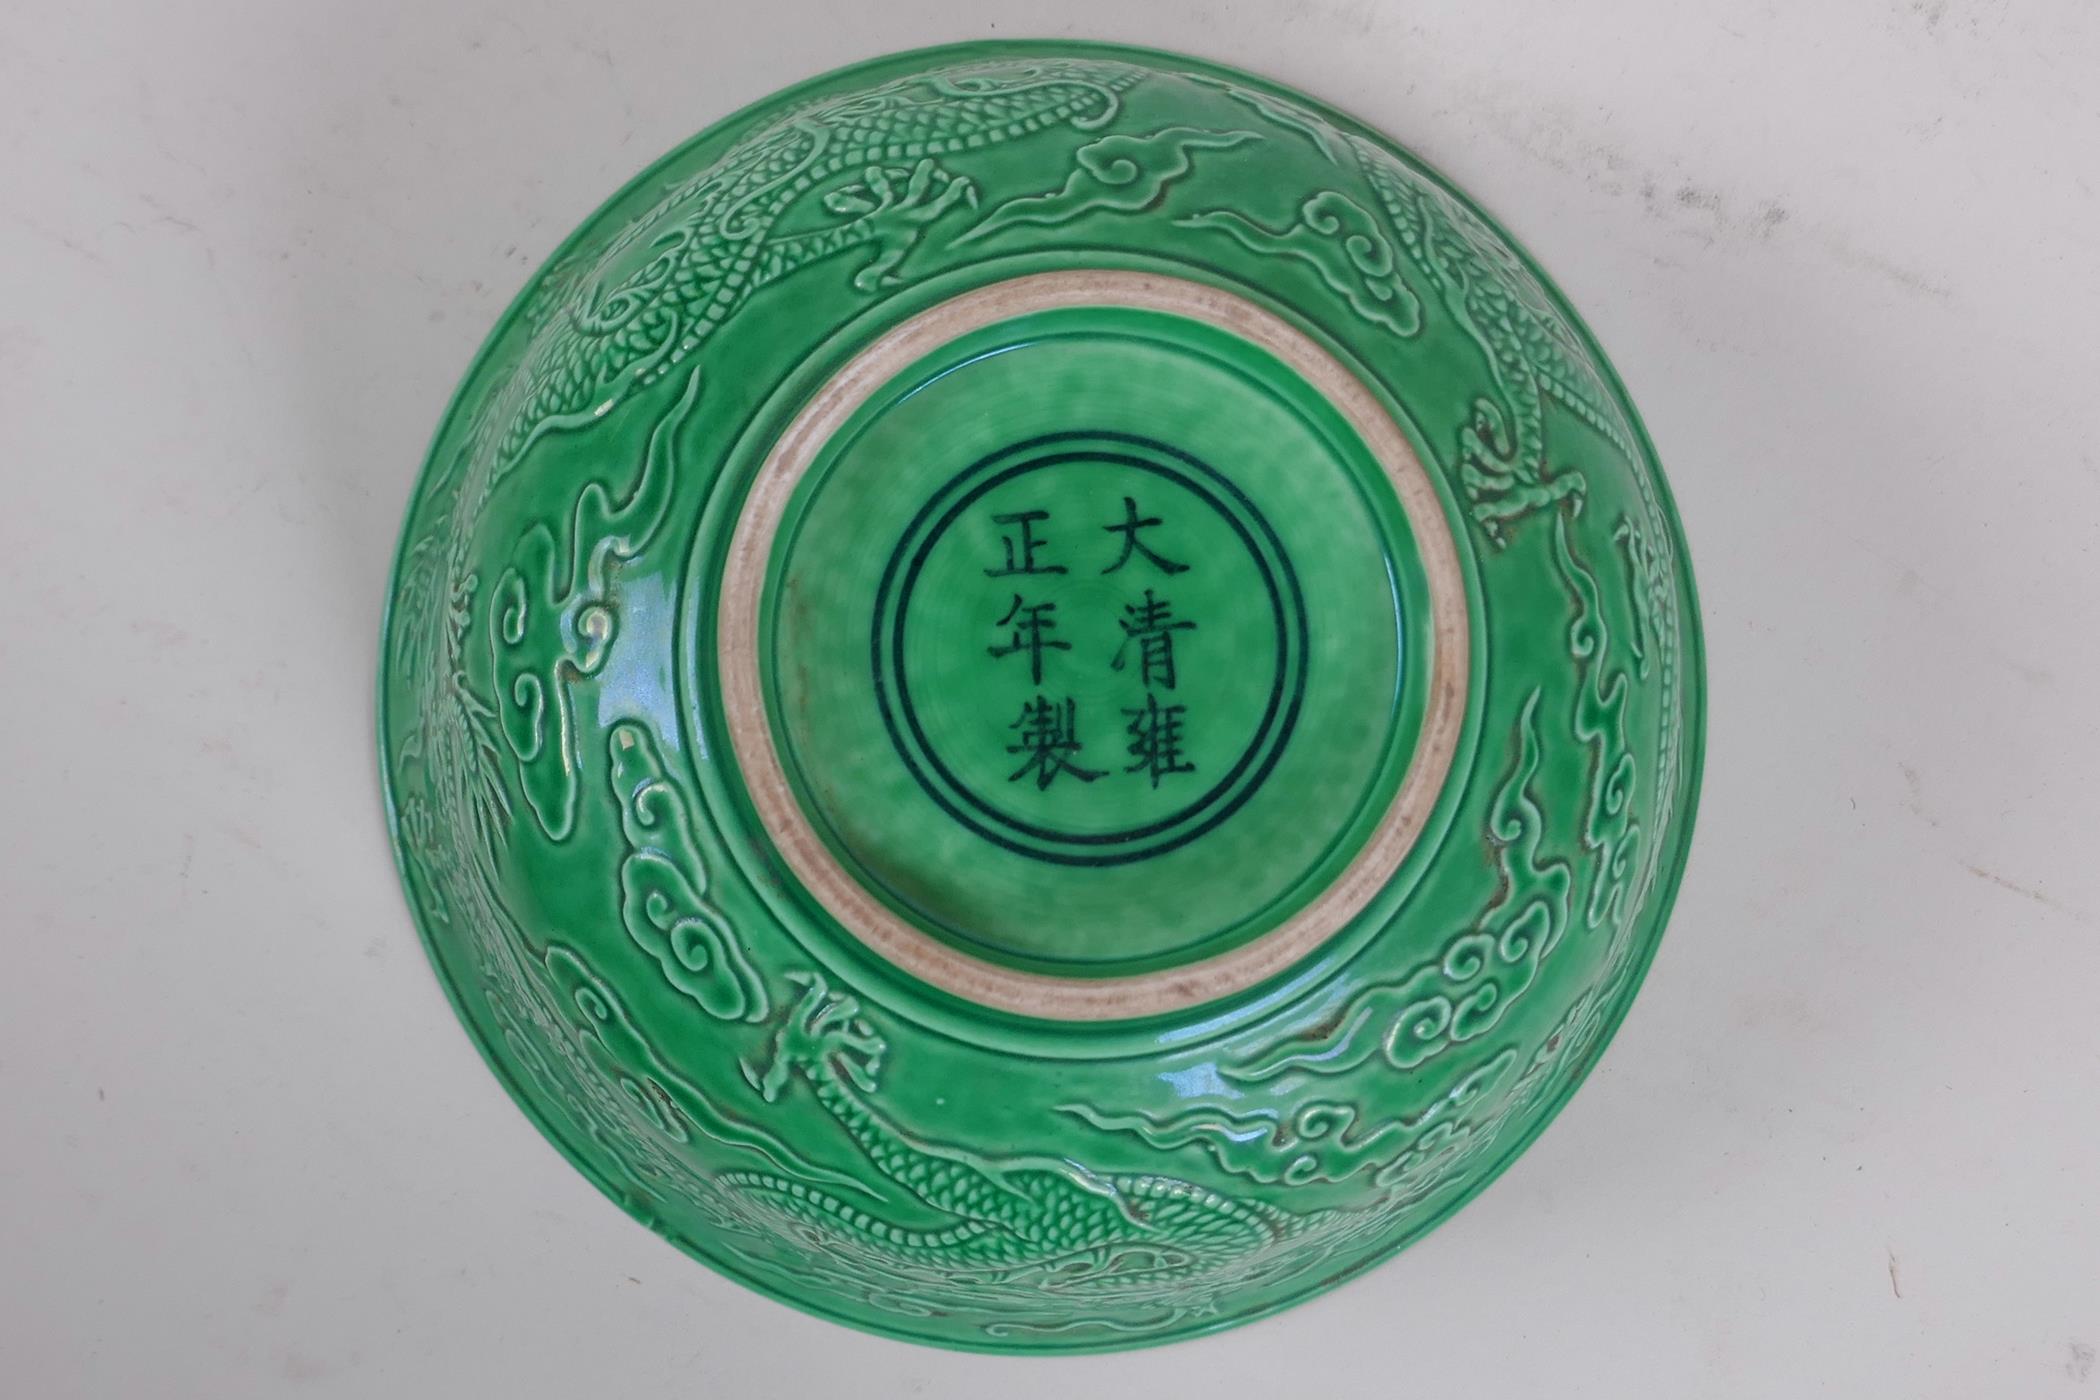 A Chinese green glazed porcelain rice bowl with raised dragon decoration, 6 character mark to - Image 4 of 4